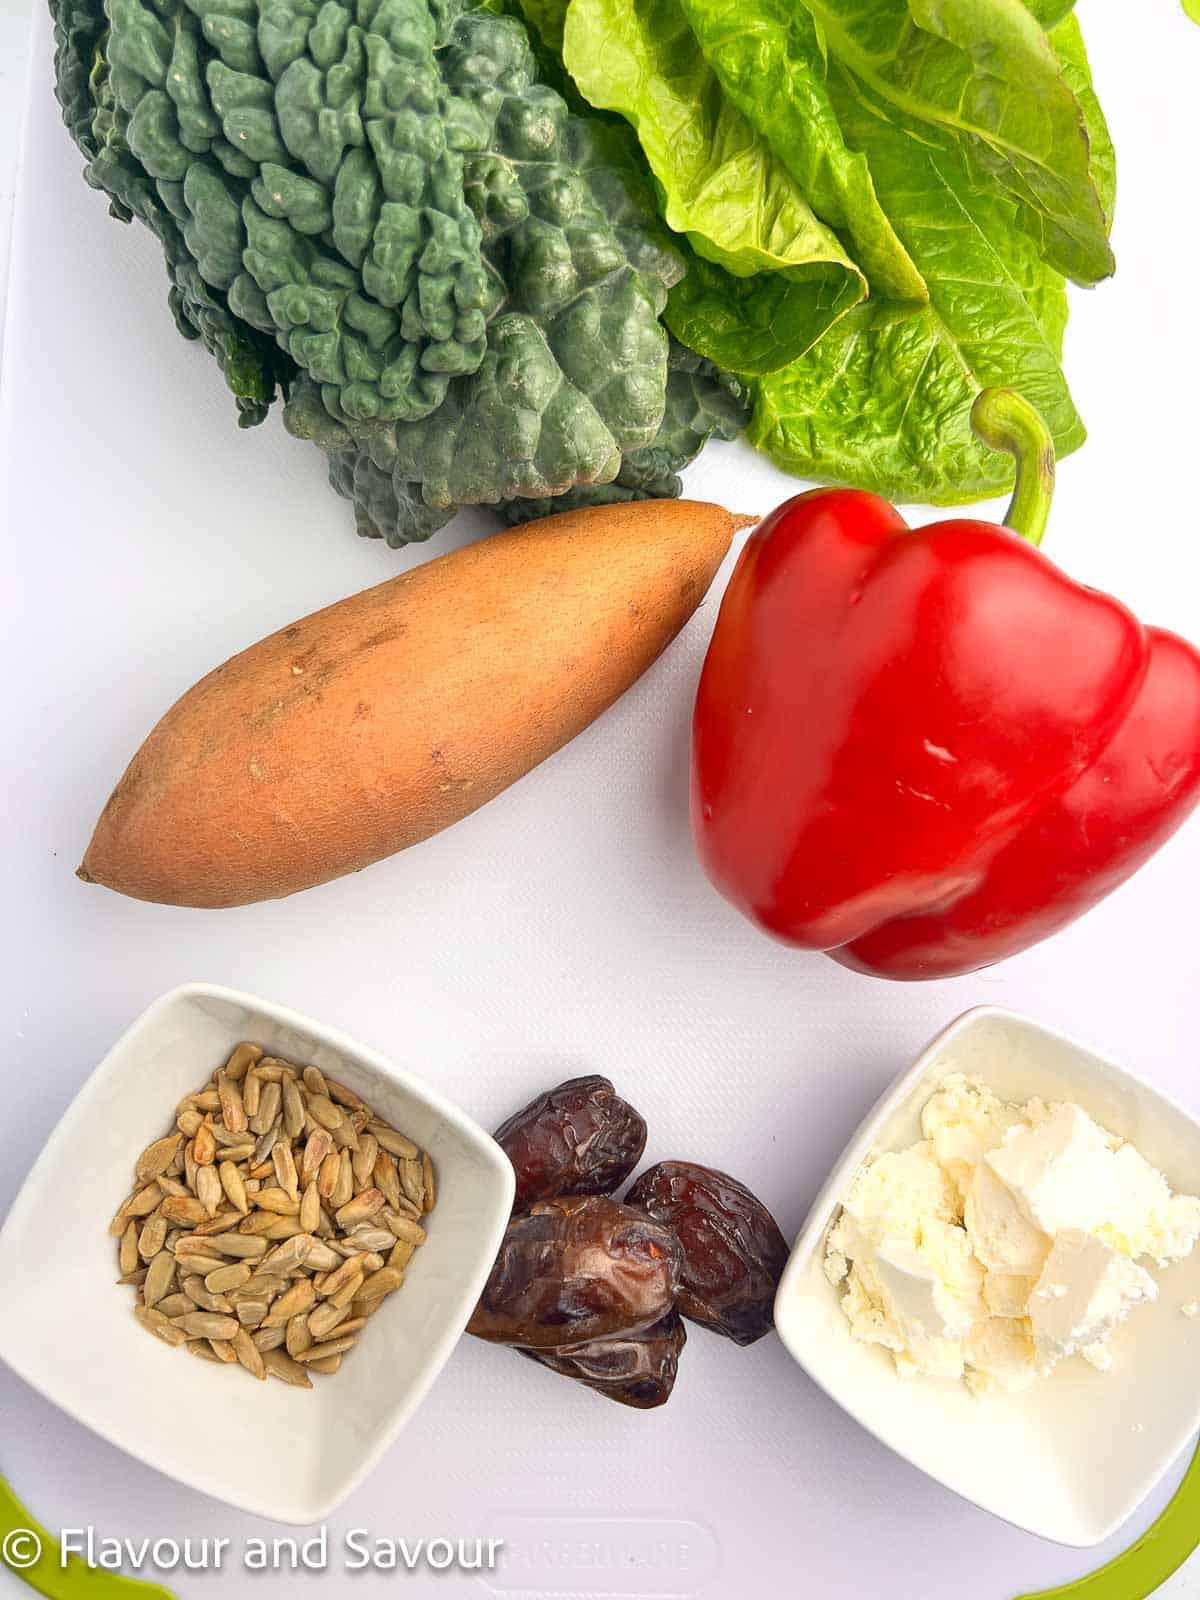 Ingredients for Roasted Sweet Potato Kale Salad: kale, romaine, red pepper, sweet potato, sunflower seeds, dates, and feta cheese.